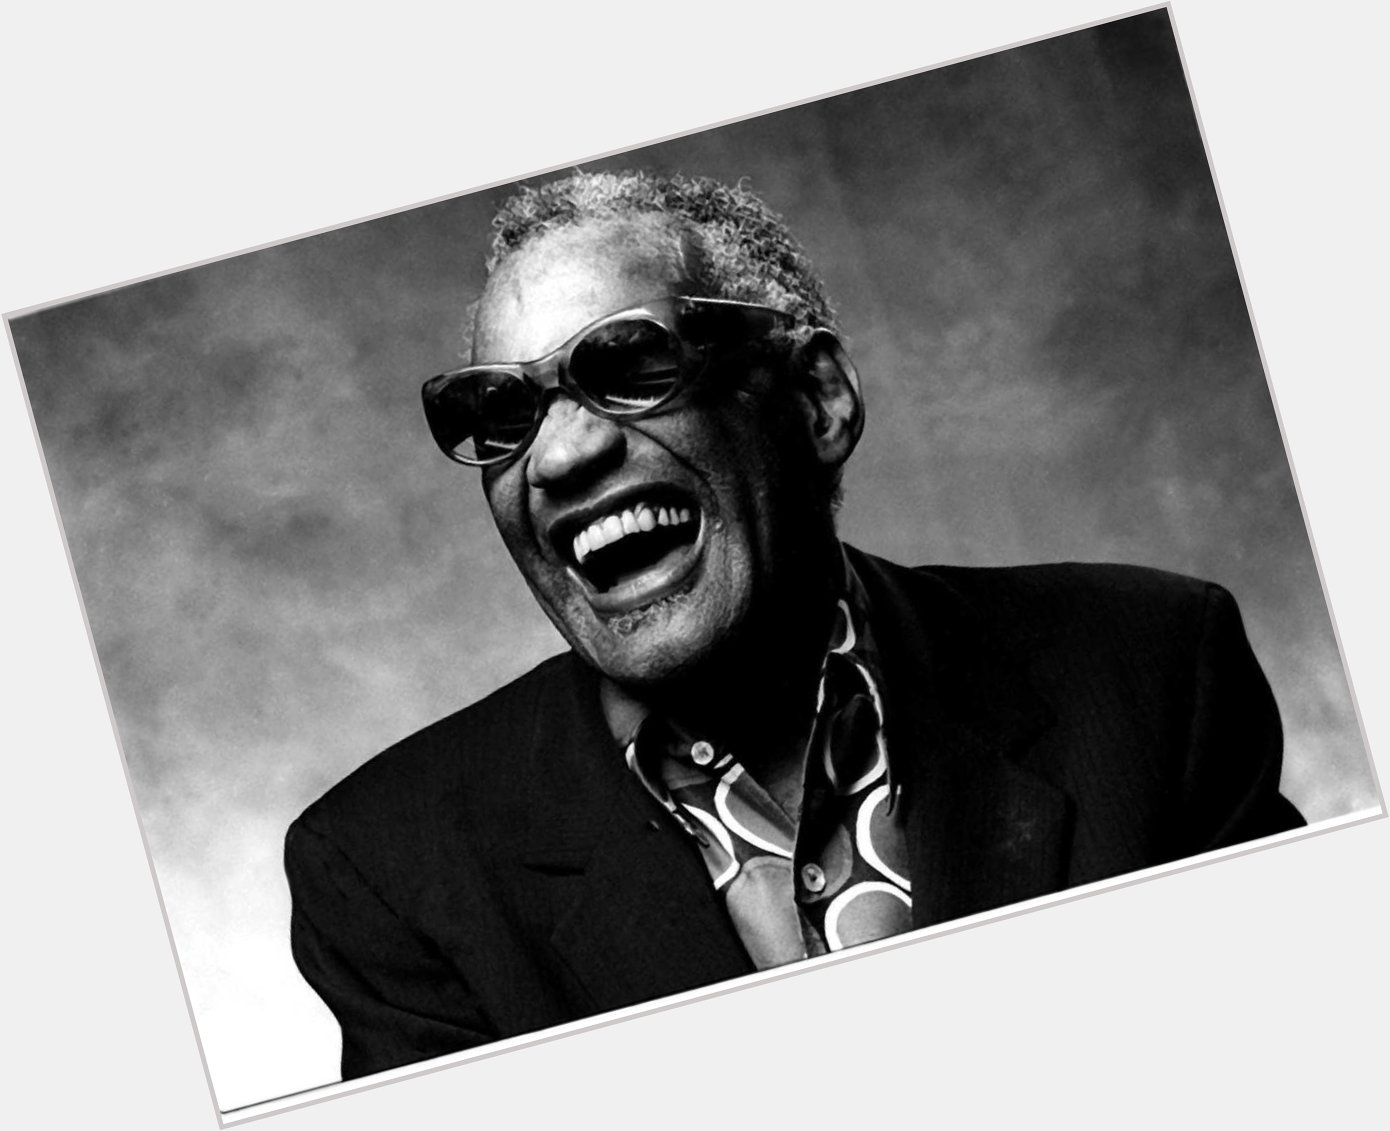 Happy birthday, Ray Charles! This music legend would have turned 85 today.  